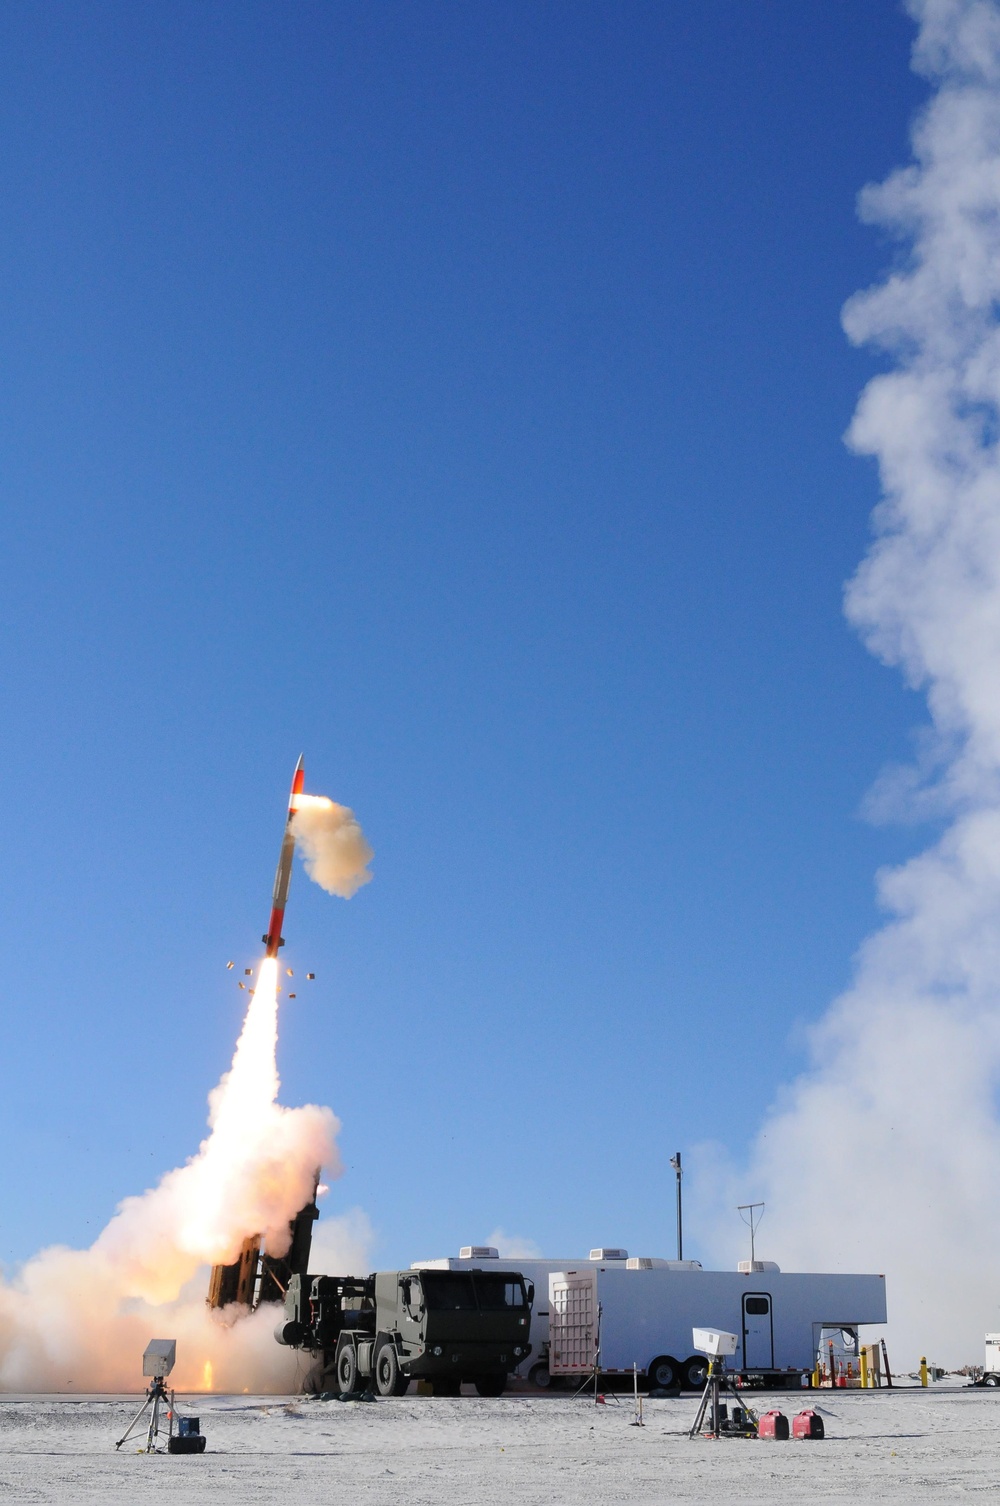 MEADS FT-2 Missile launch